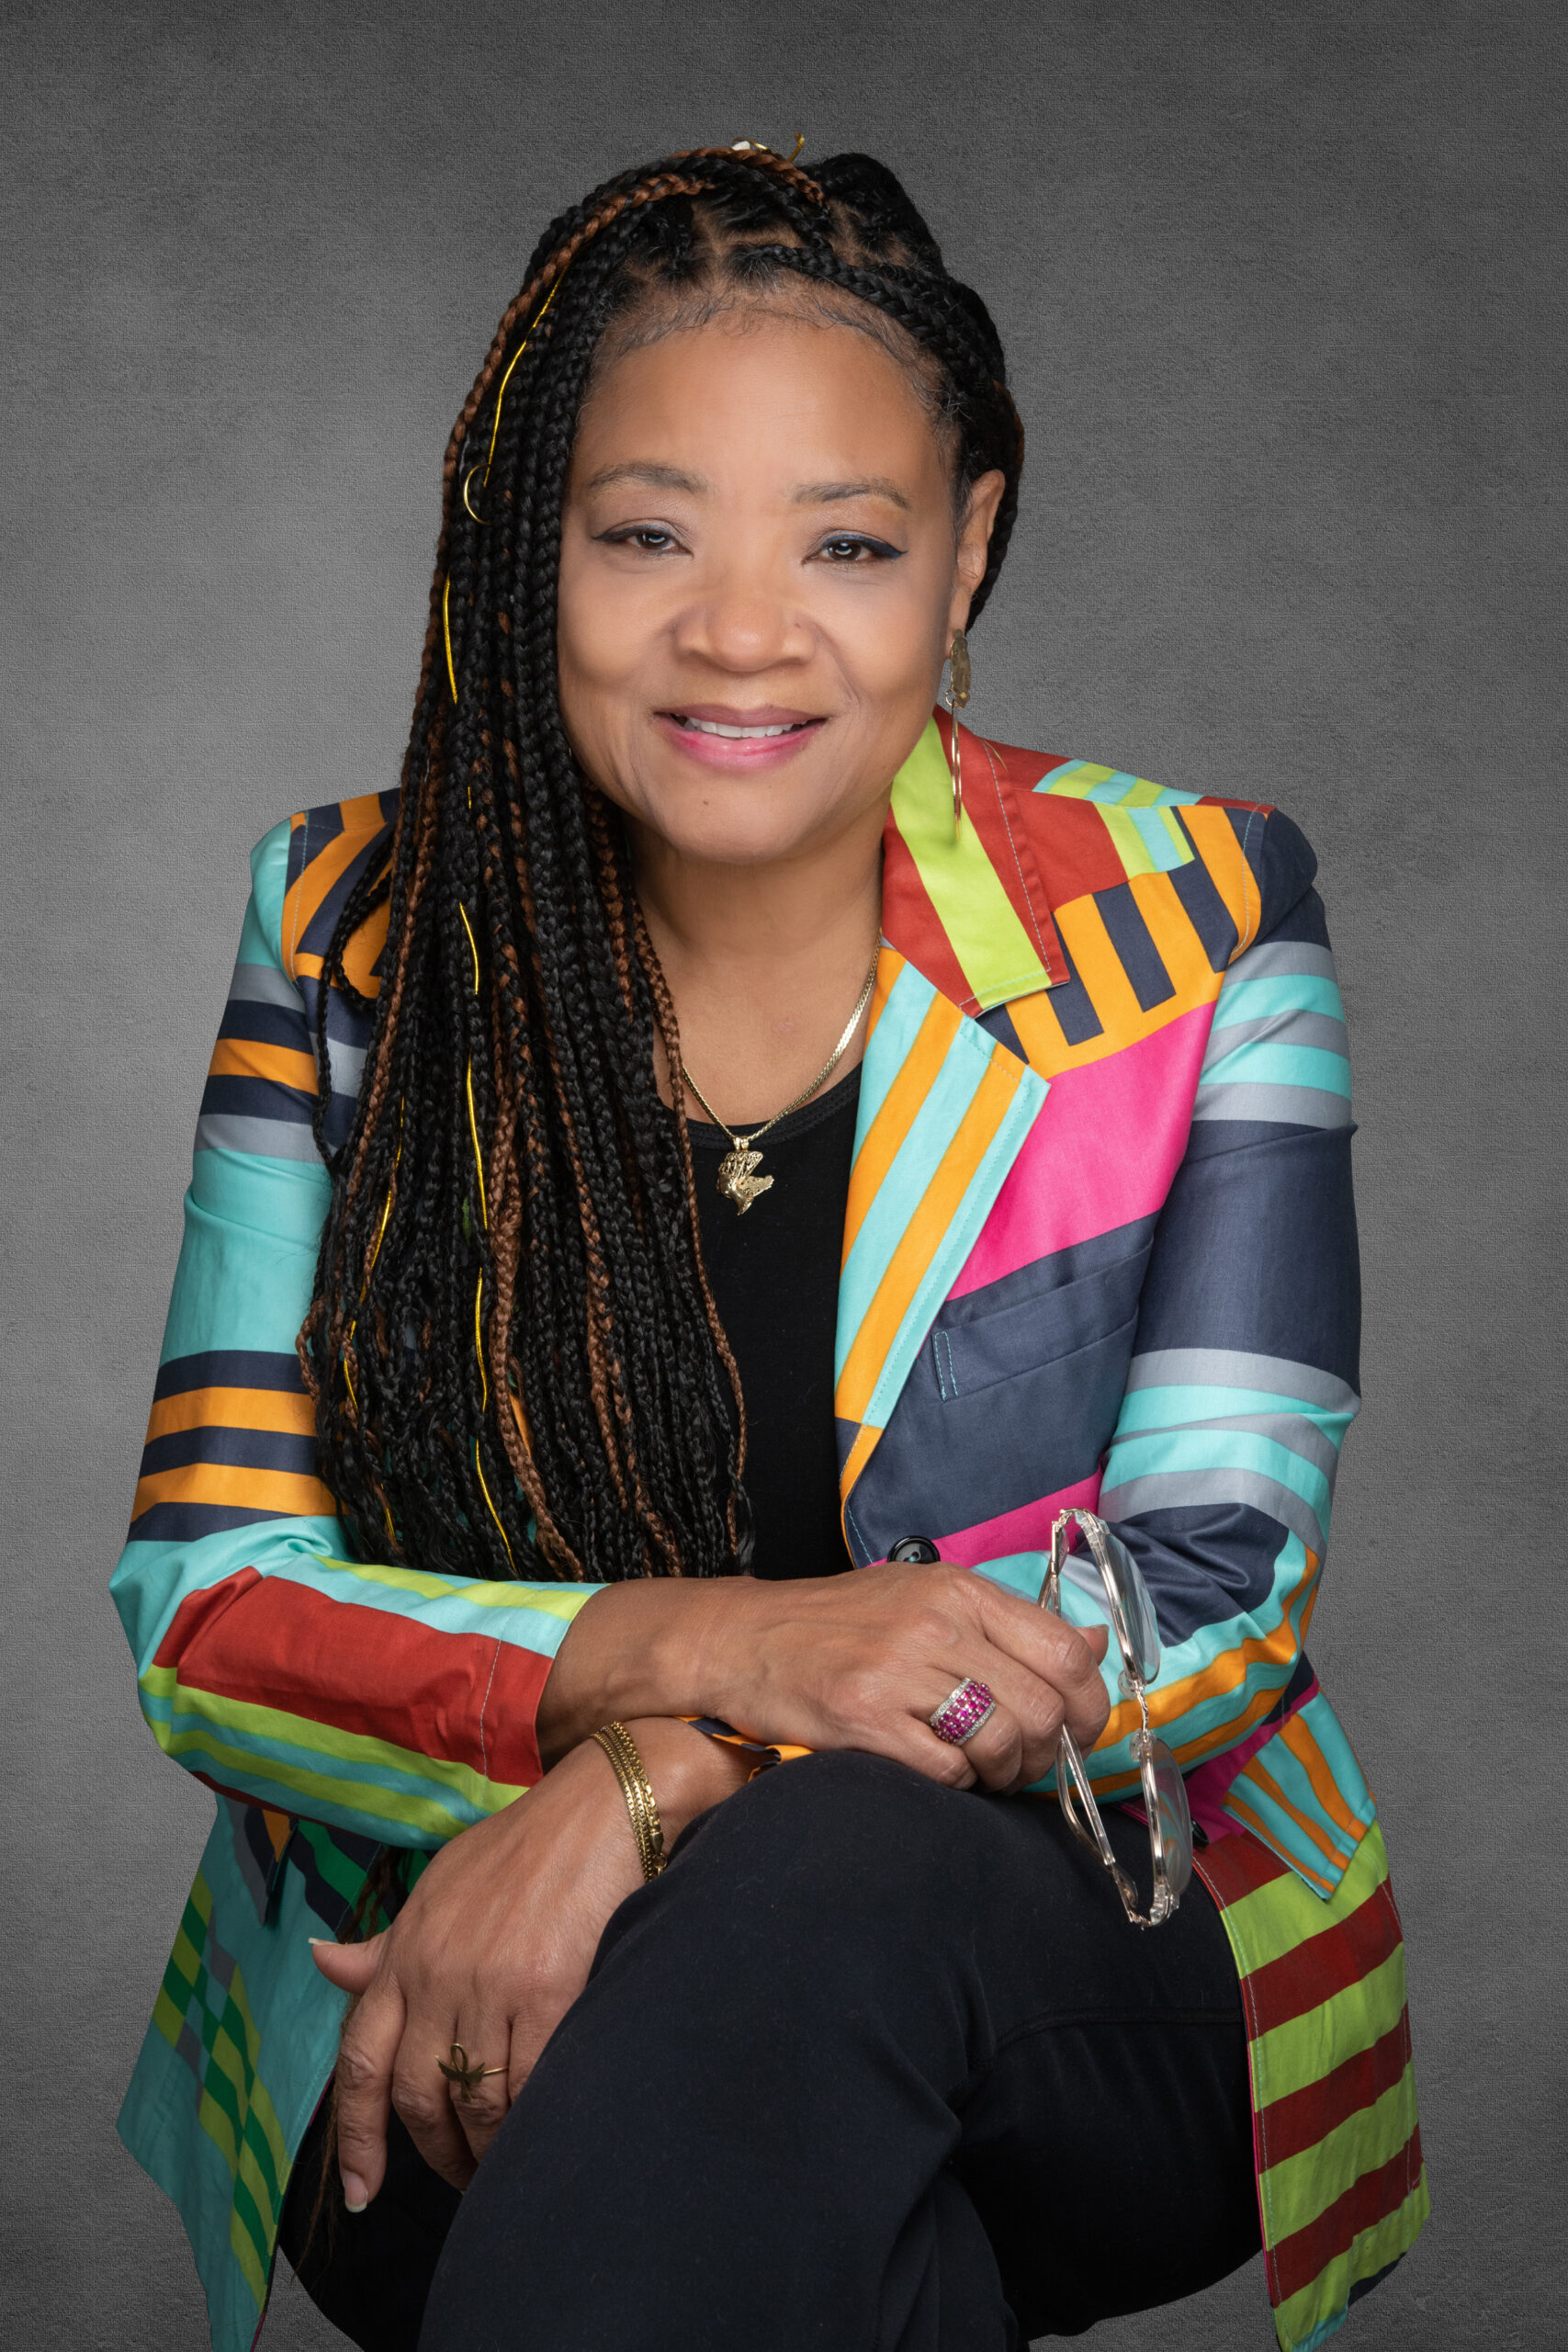 A portrait of a black woman wearing a colorful outfit